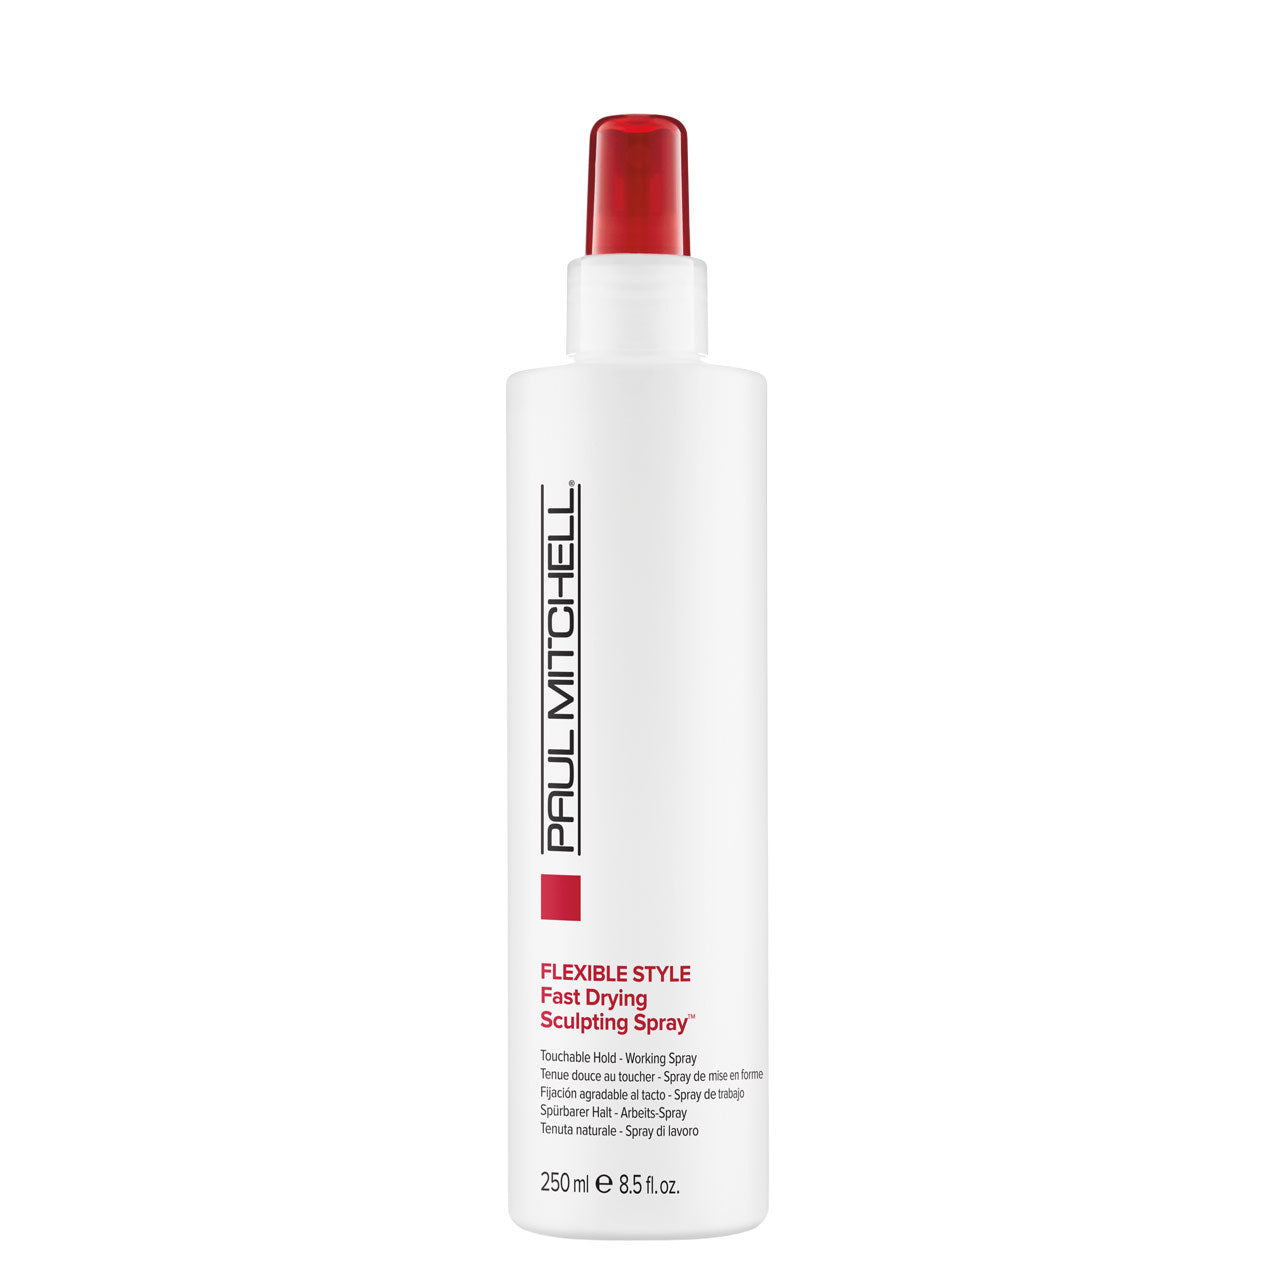 FLEXIBLE STYLE - Fast Drying Sculpting Spray - Hypnotic Store